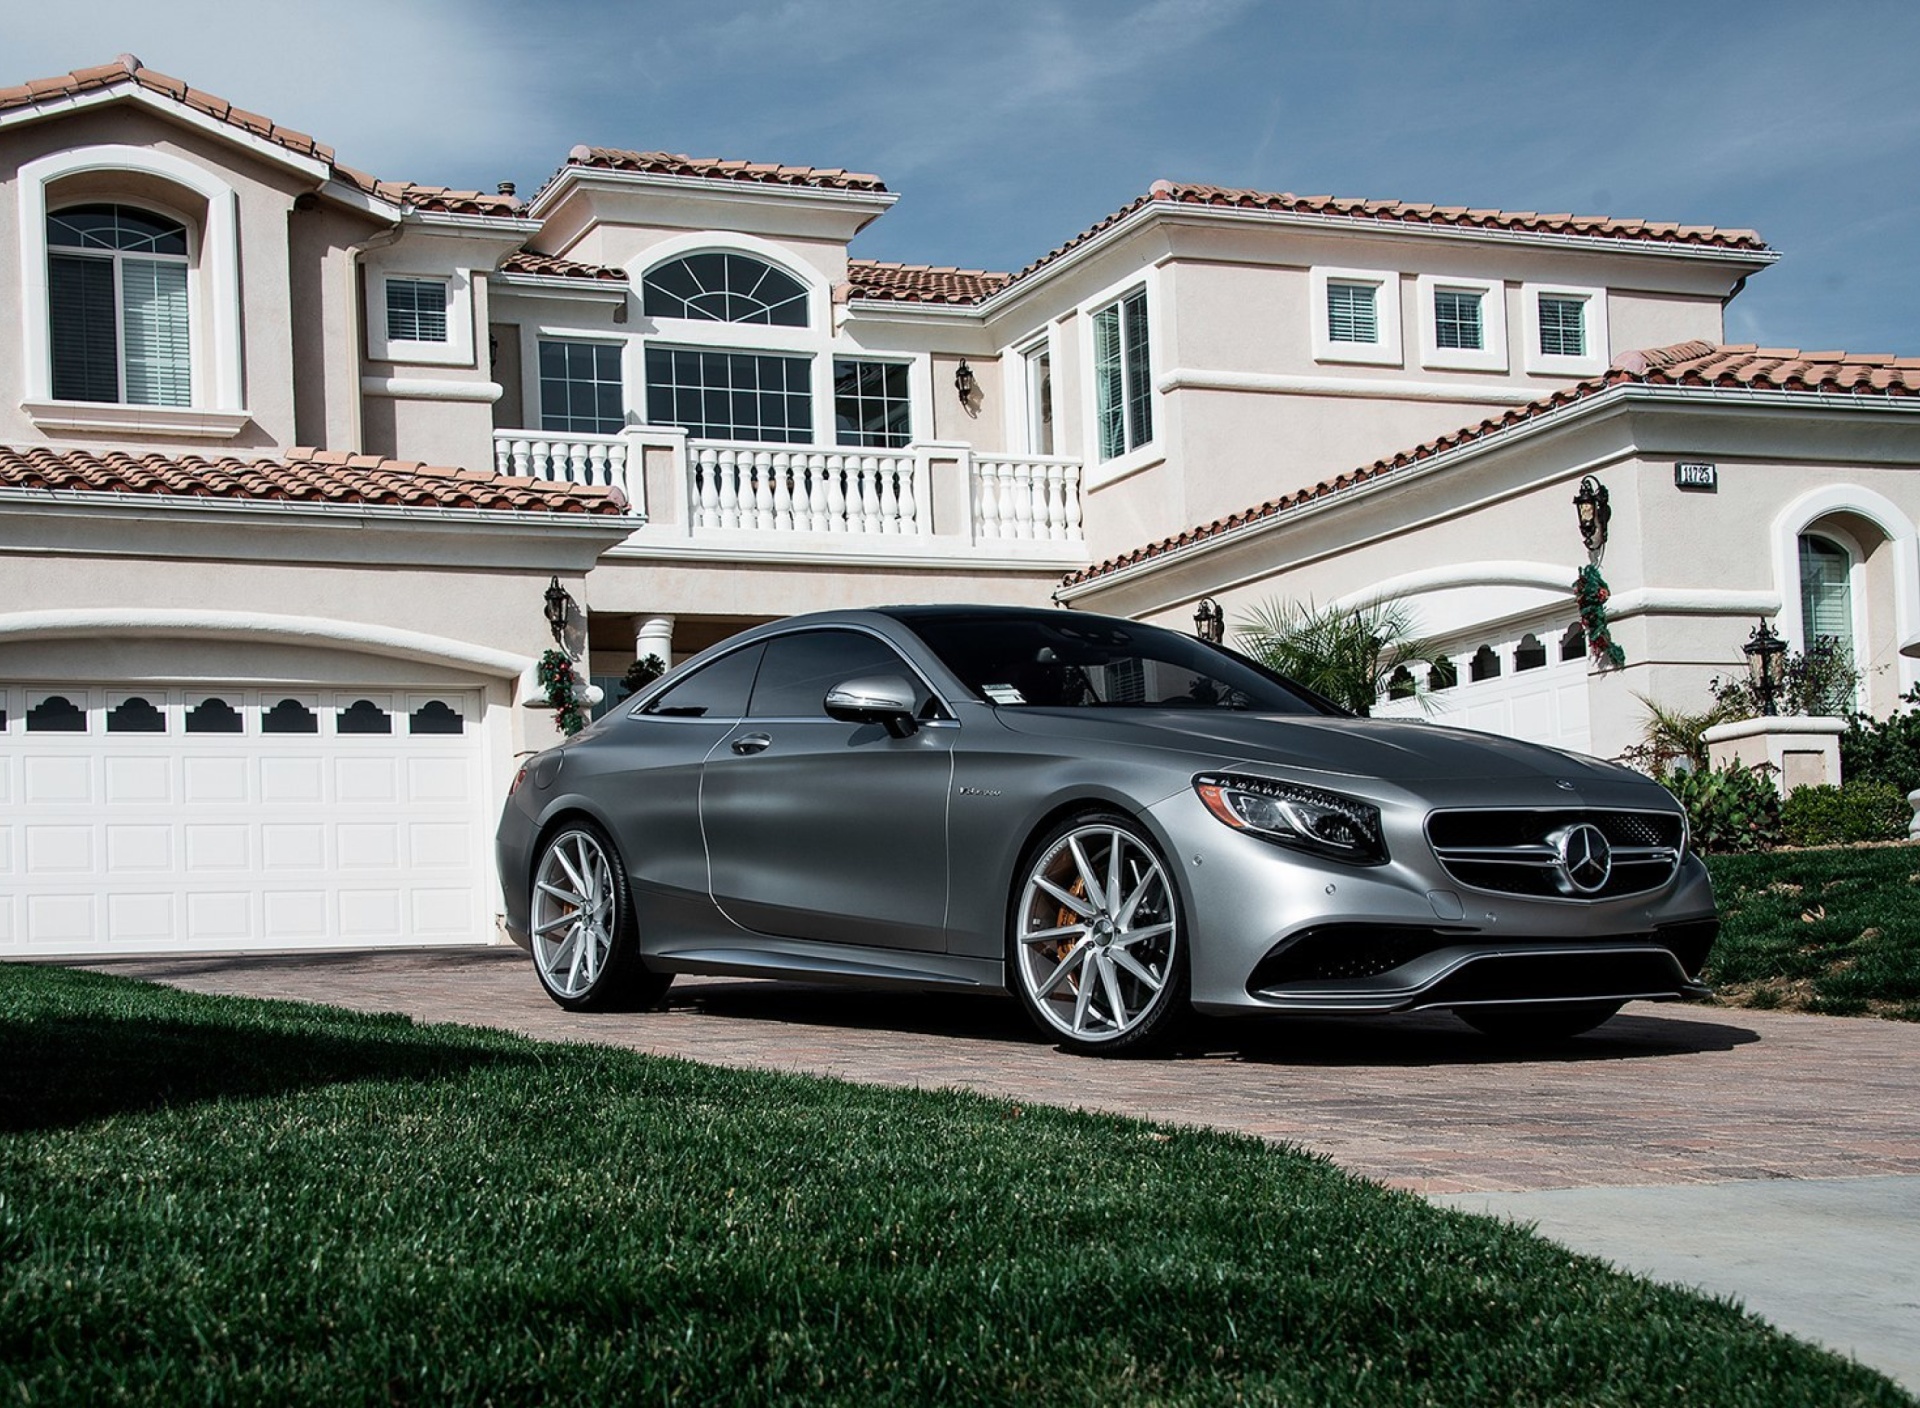 Mercedes Benz S63 AMG Coupe wallpaper 1920x1408